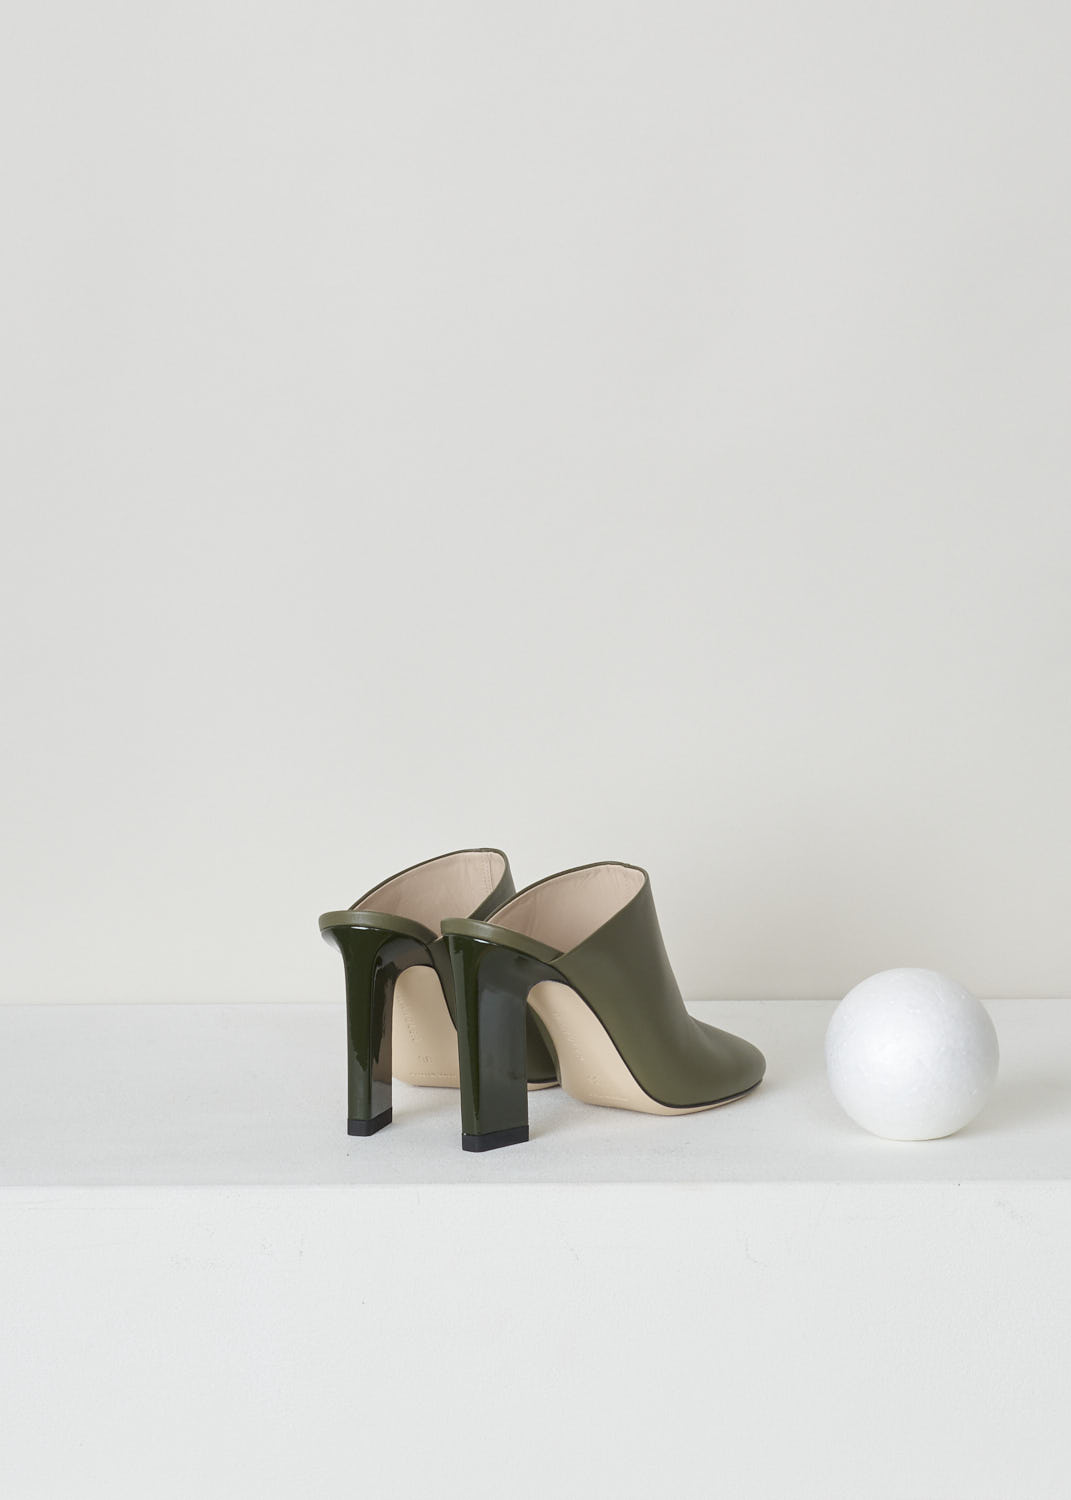 WANDLER, OLIVE GREEN MULES WITH BLOCK HEEL, CASTA_MULE_20210_341201_2629_OLIVE, Green, Back, These olive green slip-in mules feature a rectangular block heel and a round toe. A decorative seam runs along the front of the shoe.

Heel height: 9.5 cm / 3.7 inch 

